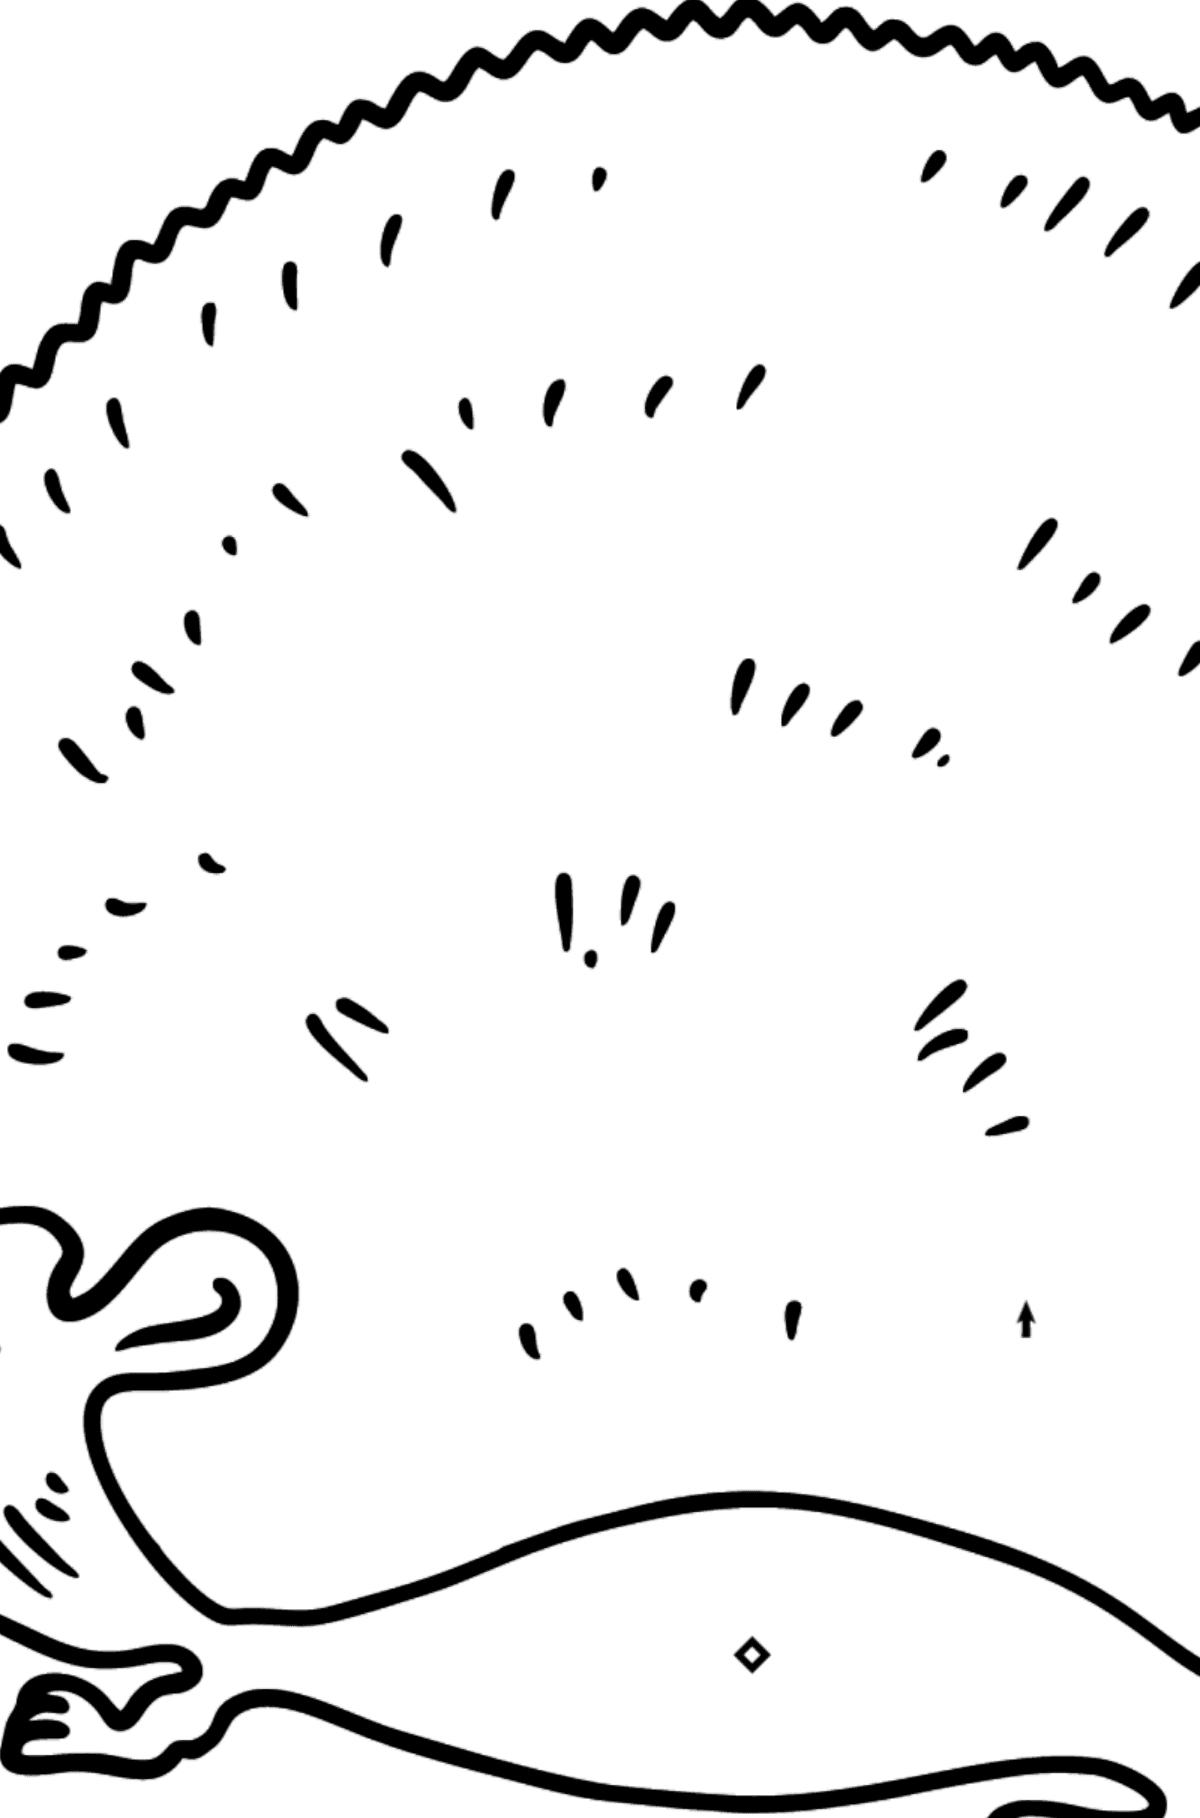 Hedgehog coloring page - Coloring by Symbols for Kids